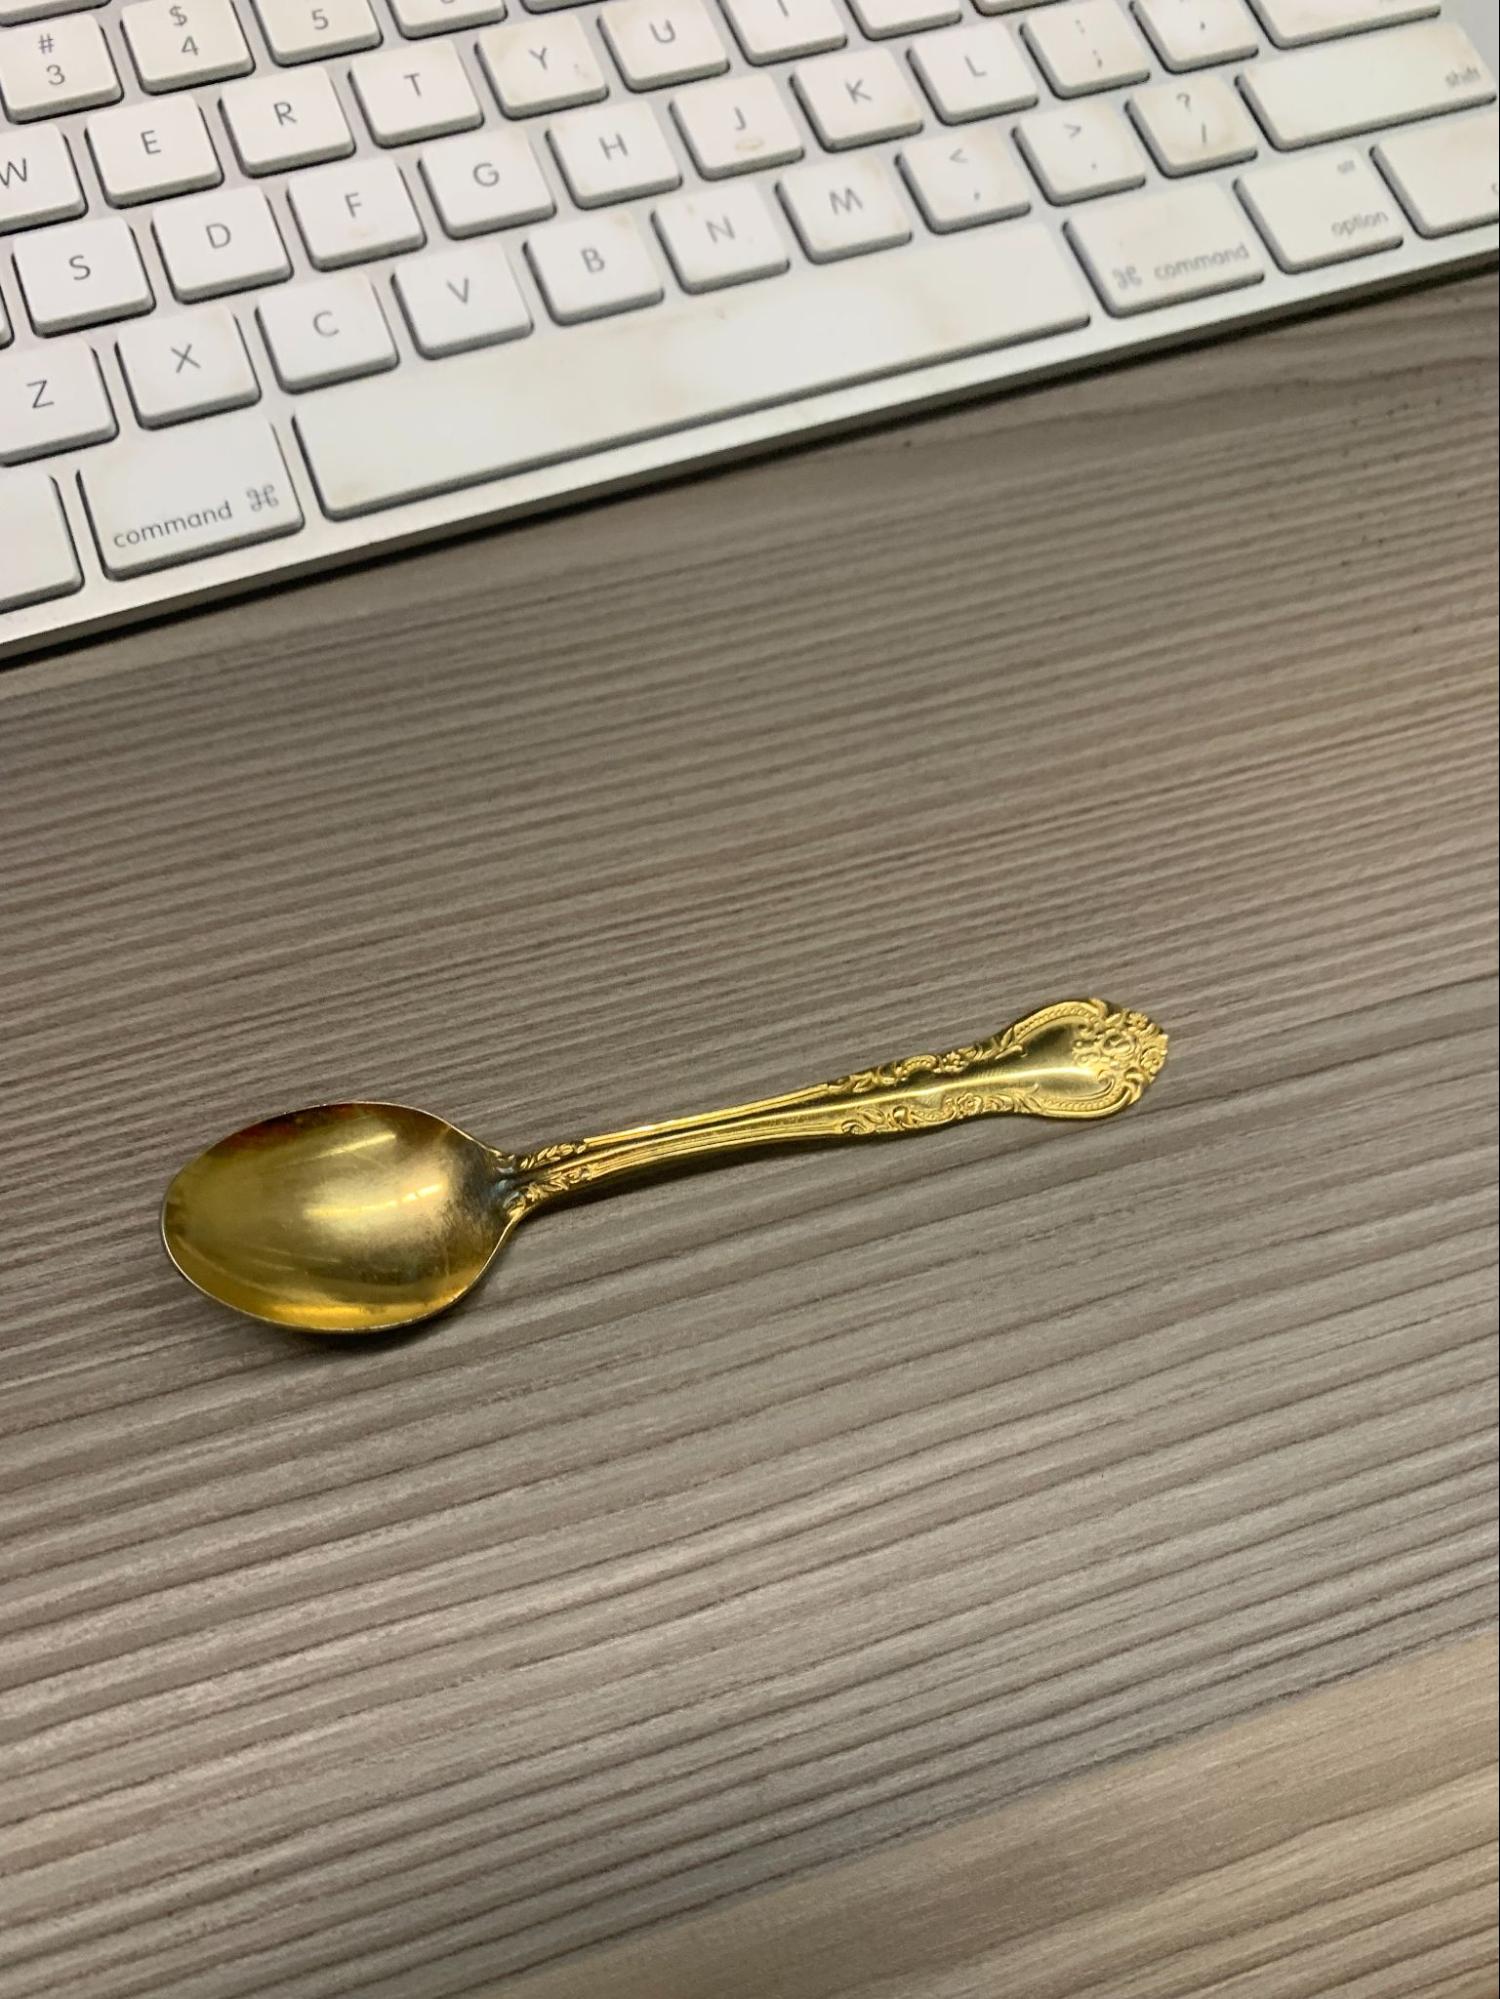 also Spoon!